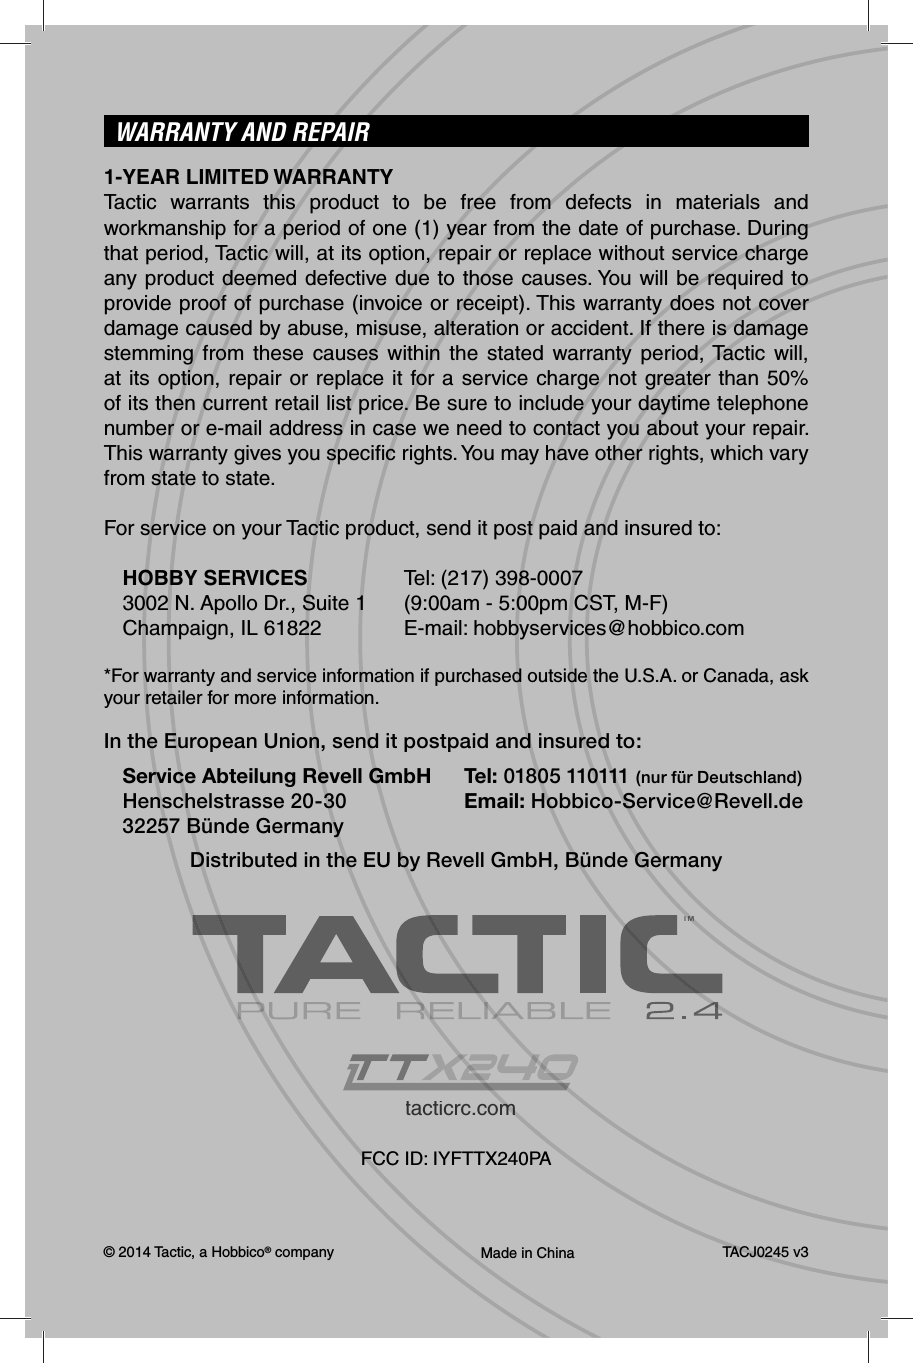 © 2014 Tactic, a Hobbico® company Made in China TACJ0245 v3WARRANTY AND REPAIR1-YEAR LIMITED WARRANTYTactic warrants this product to be free from defects in materials and workmanship for a period of one (1) year from the date of purchase. During that period, Tactic will, at its option, repair or replace without service charge any product deemed defective due to those causes. You will be required to provide proof of purchase (invoice or receipt). This warranty does not cover damage caused by abuse, misuse, alteration or accident. If there is damage stemming from these causes within the stated warranty period, Tactic will, at its option, repair or replace it for a service charge not greater than 50% of its then current retail list price. Be sure to include your daytime telephone number or e-mail address in case we need to contact you about your repair. This warranty gives you speciﬁ c rights. You may have other rights, which vary from state to state.For service on your Tactic product, send it post paid and insured to:HOBBY SERVICES  Tel: (217) 398-00073002 N. Apollo Dr., Suite 1  (9:00am - 5:00pm CST, M-F)Champaign, IL 61822  E-mail: hobbyservices@hobbico.com*For warranty and service information if purchased outside the U.S.A. or Canada, ask your retailer for more information.In the European Union, send it postpaid and insured to:Service Abteilung Revell GmbH  Tel: 01805 110111 (nur für Deutschland)Henschelstrasse 20-30  Email: Hobbico-Service@Revell.de32257 Bünde GermanyDistributed in the EU by Revell GmbH, Bünde Germanytacticrc.commFCC ID: IYFTTX240PATMTM